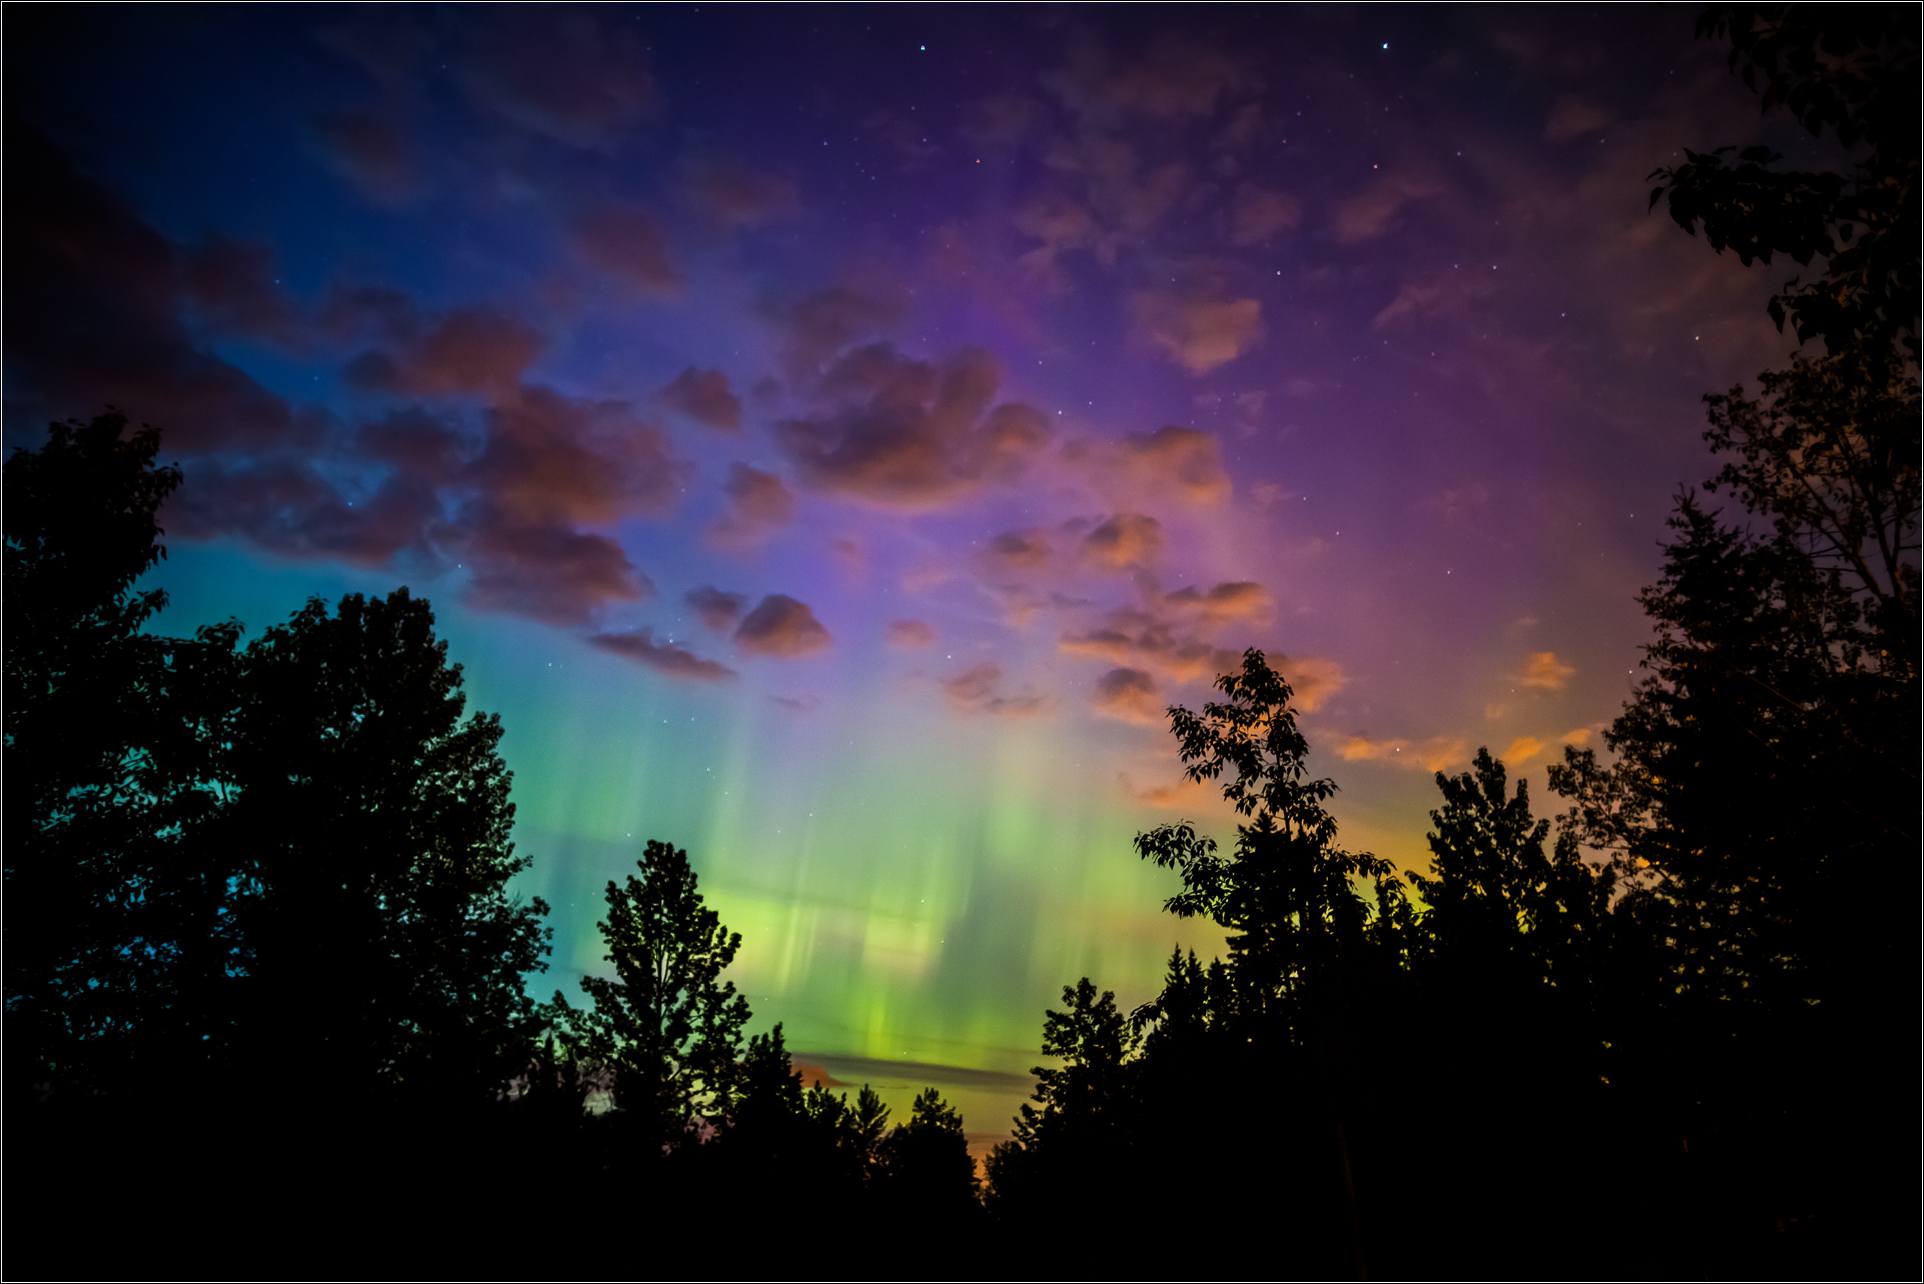 aurora borealis above the forest c2a9 christopher martin 5571